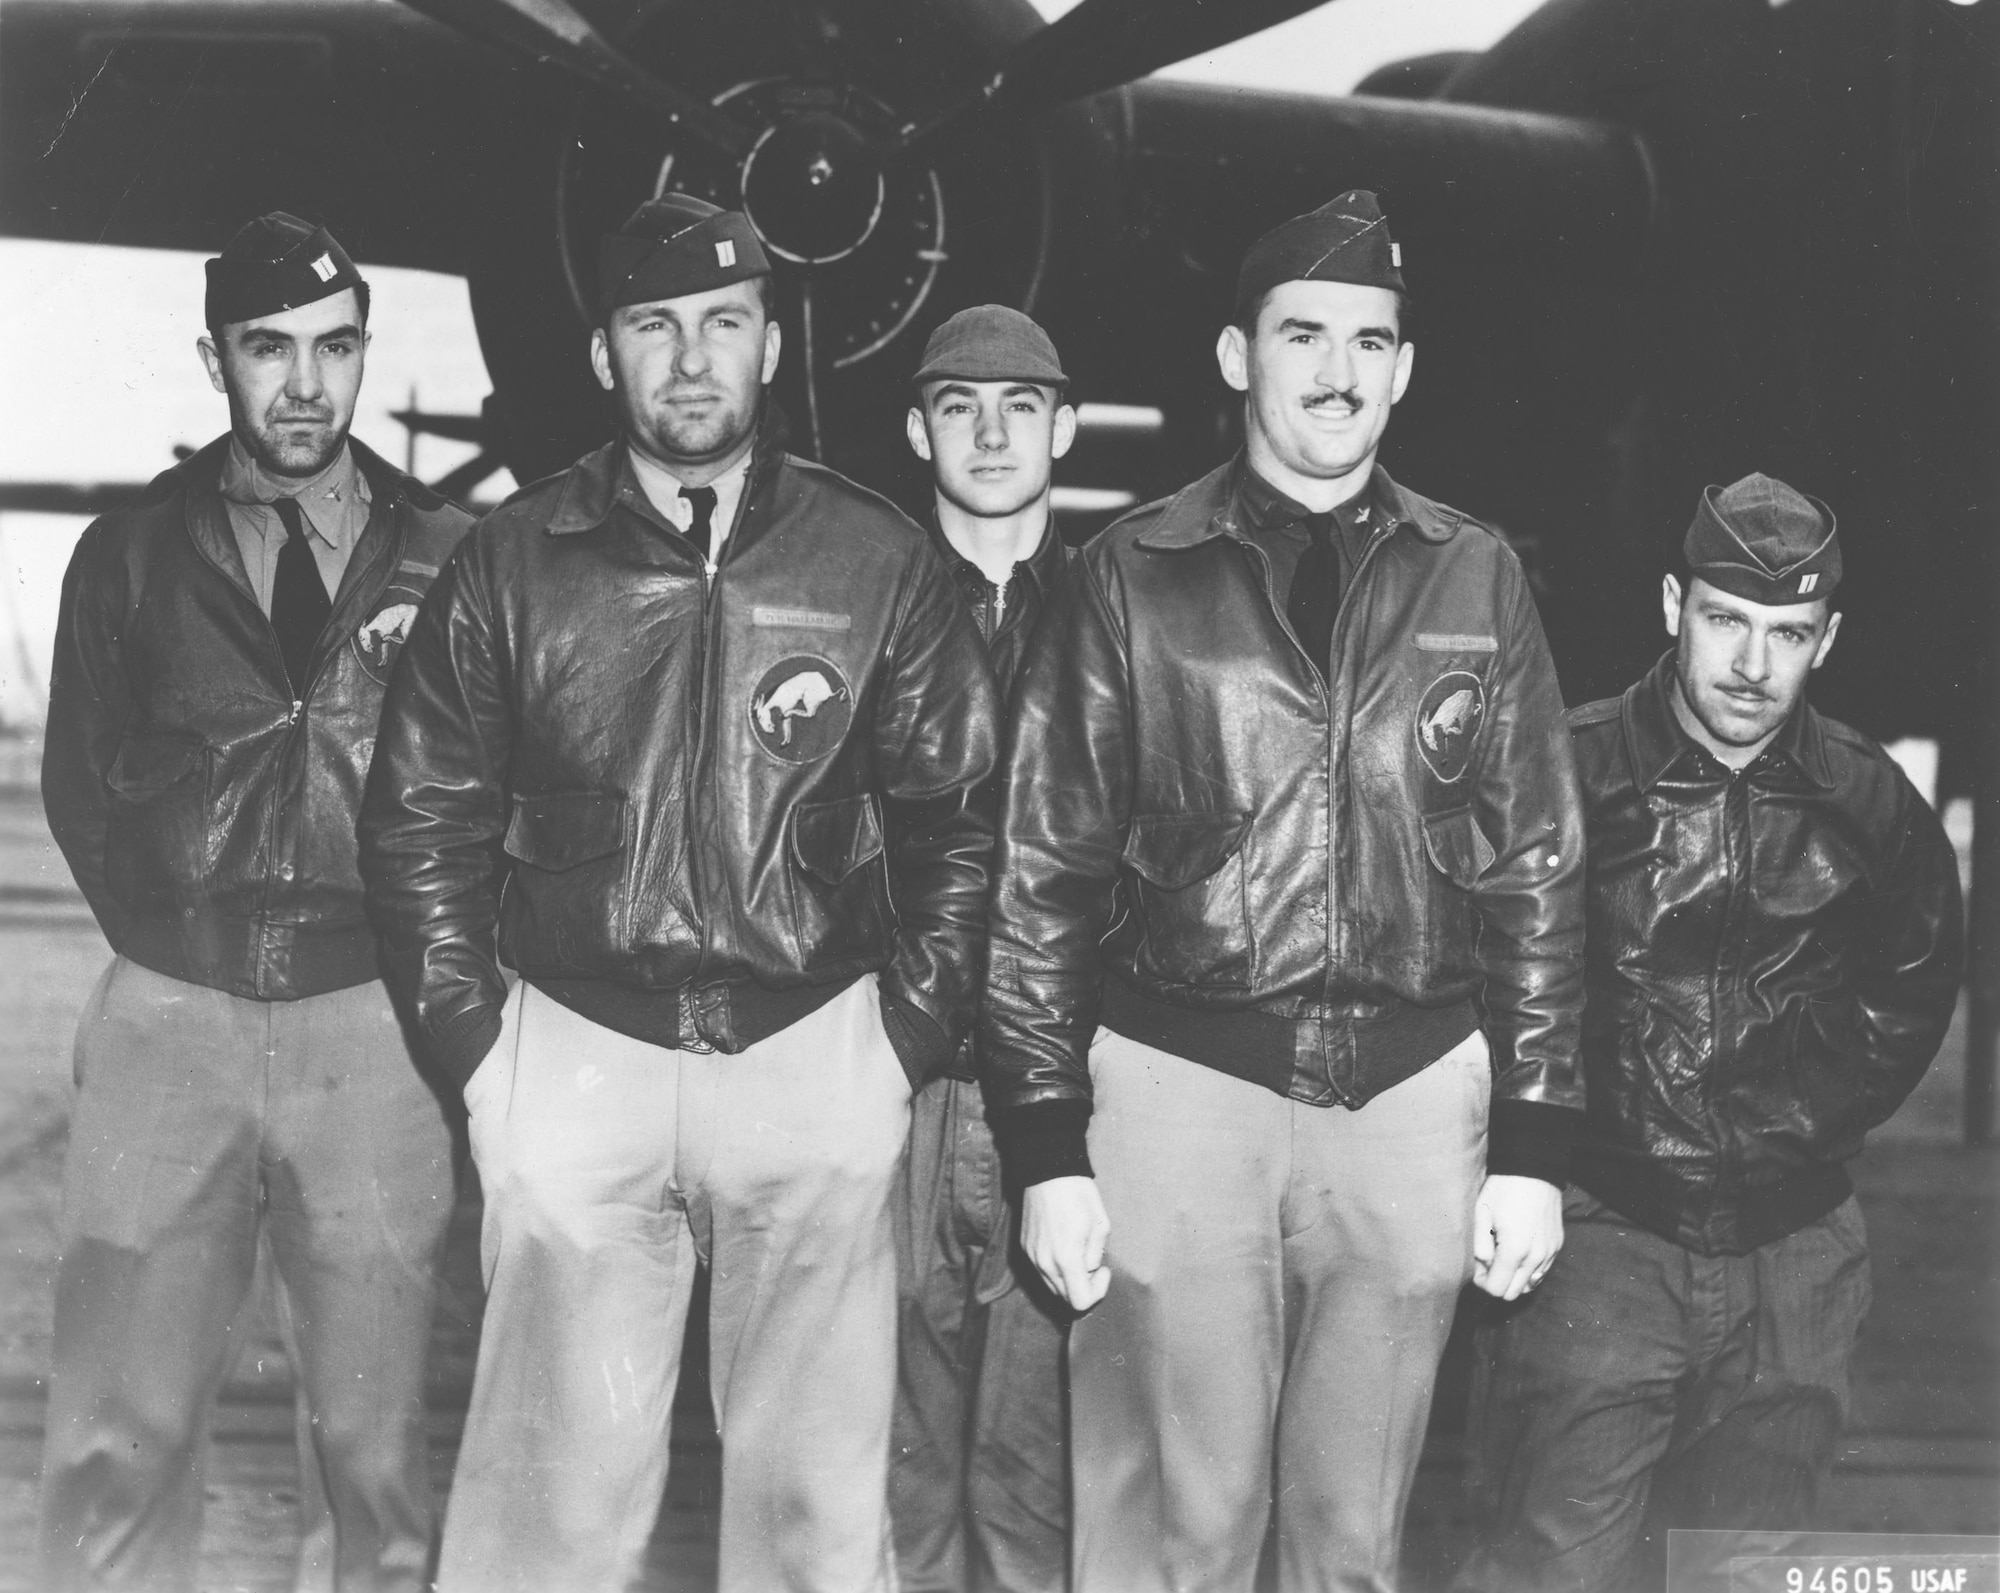 Navigator Lt. Chase J. Nielsen stands with his air crew mates before the famed Doolittle Raid mission April 18, 1942. Crew No. 6 with the  95th Bombardment Squadron flew Plane #40-2298 to bomb targets in Tokyo. Front row: Lt. Dean E. Hallmark, pilot and Lt. Robert J. Meder, copilot; back row: Lieutenant Nielsen, Sgt. William J. Dieter, bombardier; and Sgt. Donald E. Fitzmaurice, flight engineer/gunner. (U.S. Air Force photo)